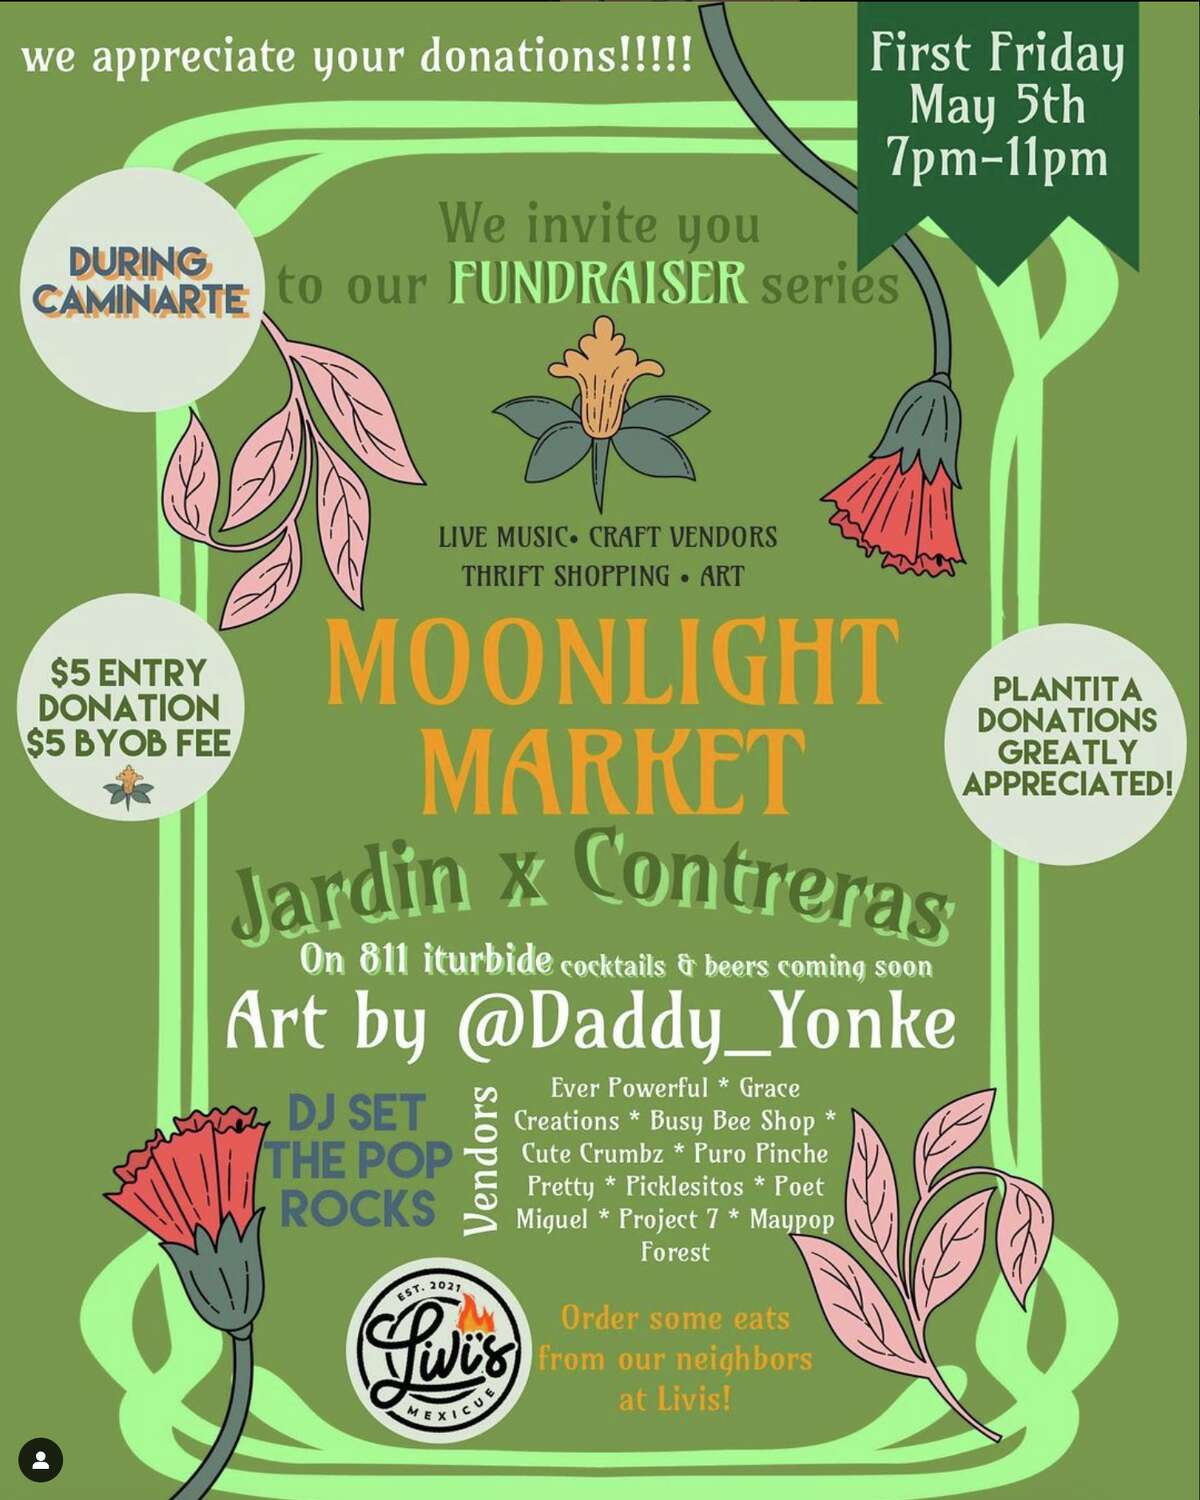 Jardin X Contreras will host a moonlight market, featuring local artists, craft vendors, thrift shopping and live music on May 5.